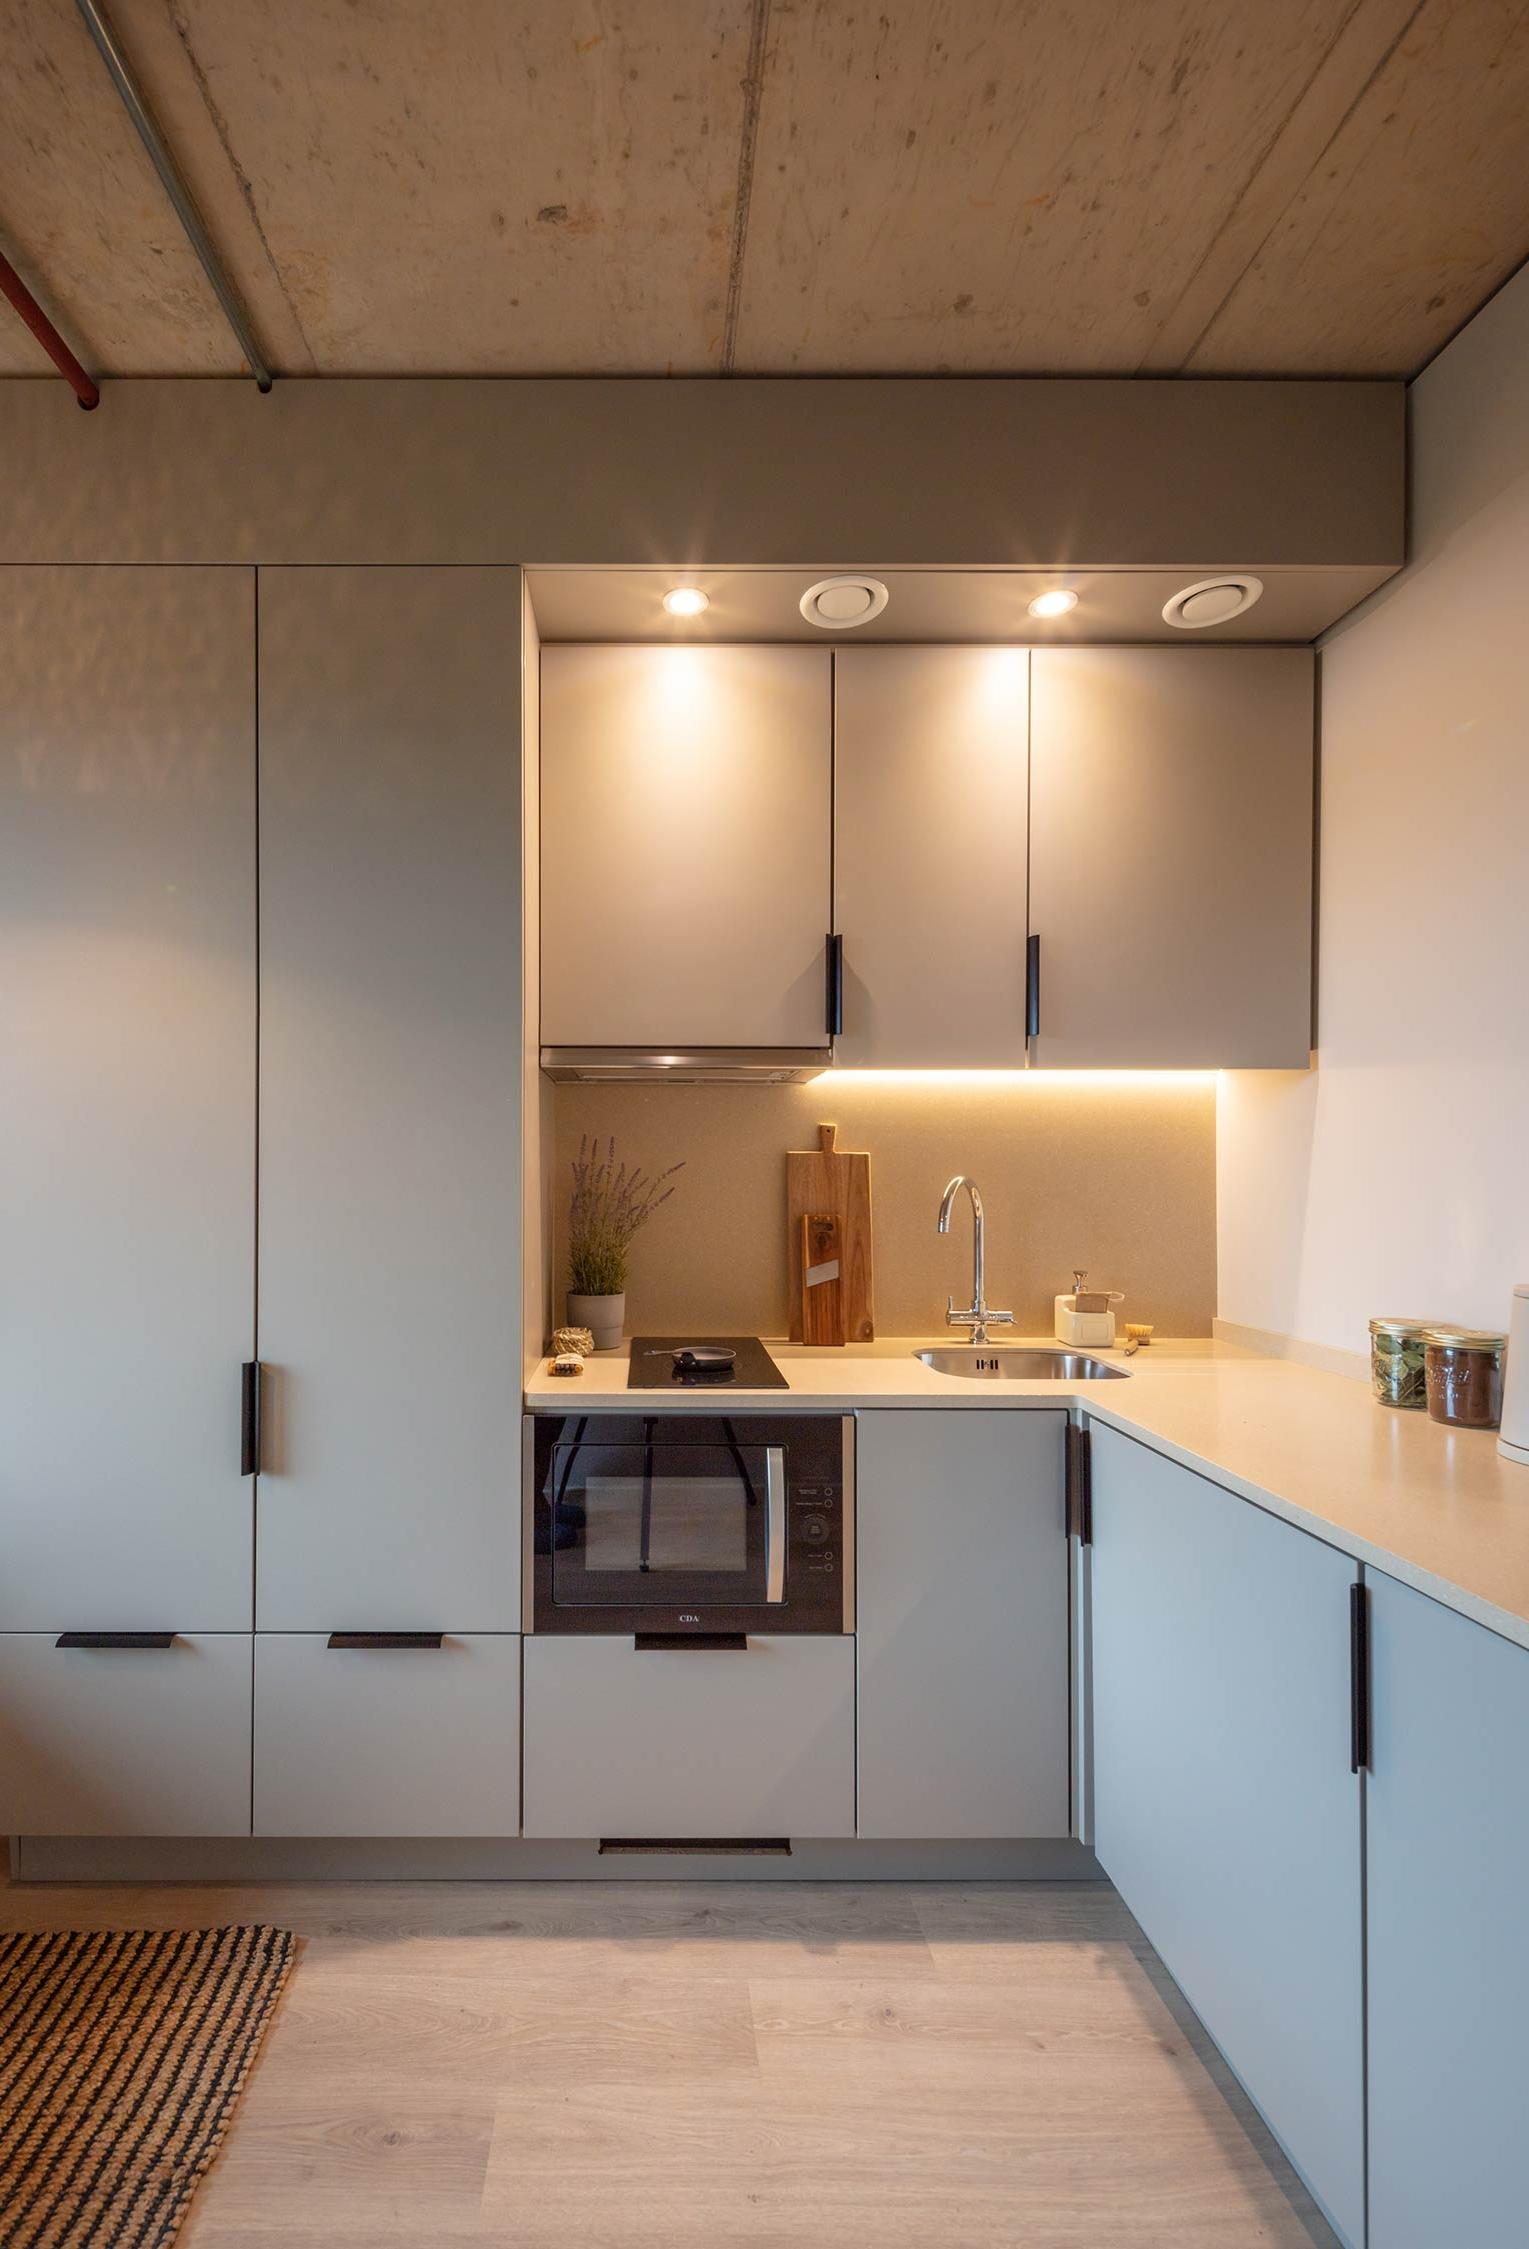 Make hearty home-cooked meals in your private kitchenette